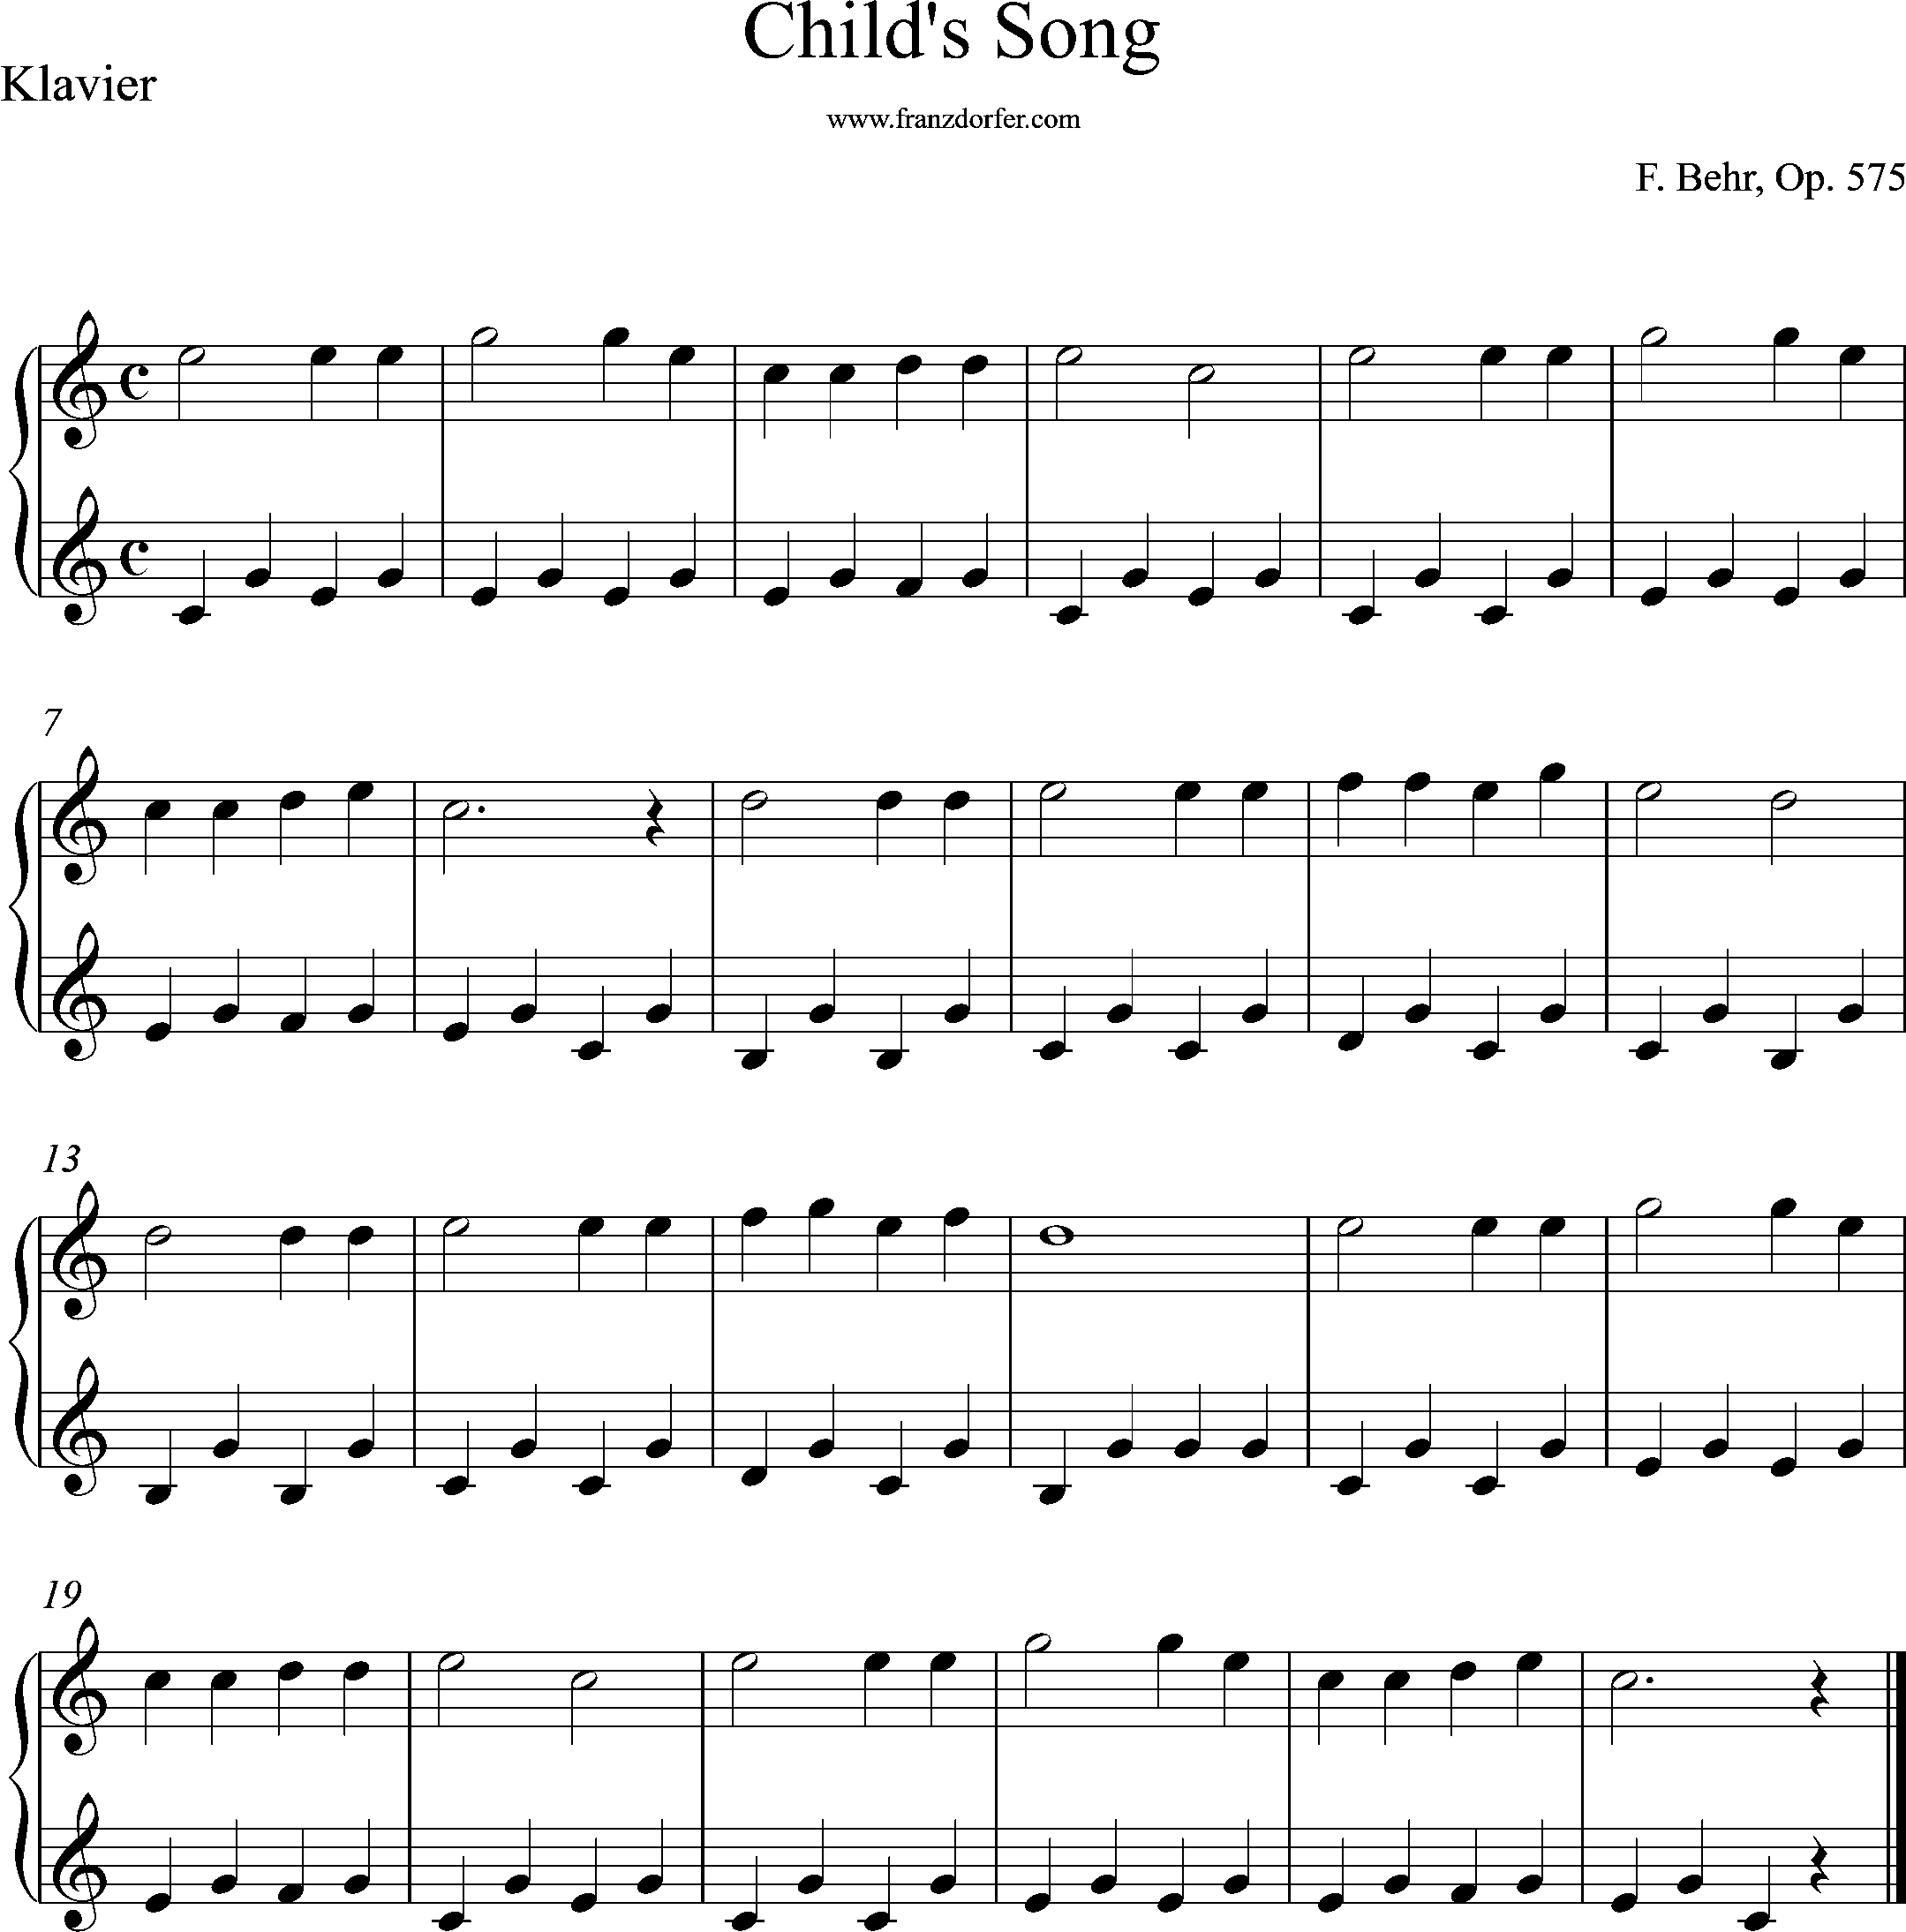 F. Behr, op.575, Childs song